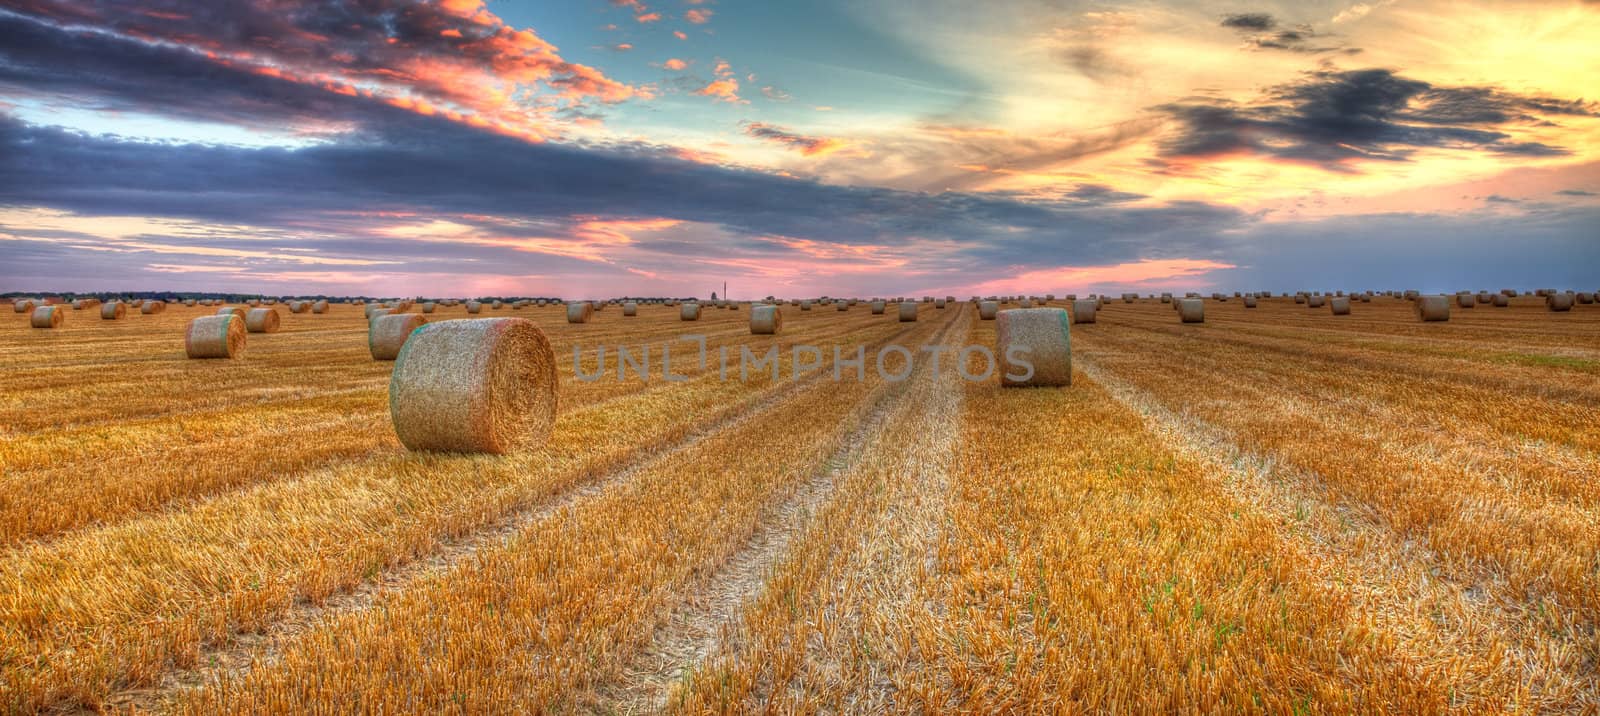 Beautiful sunset over a field with bales of hay.